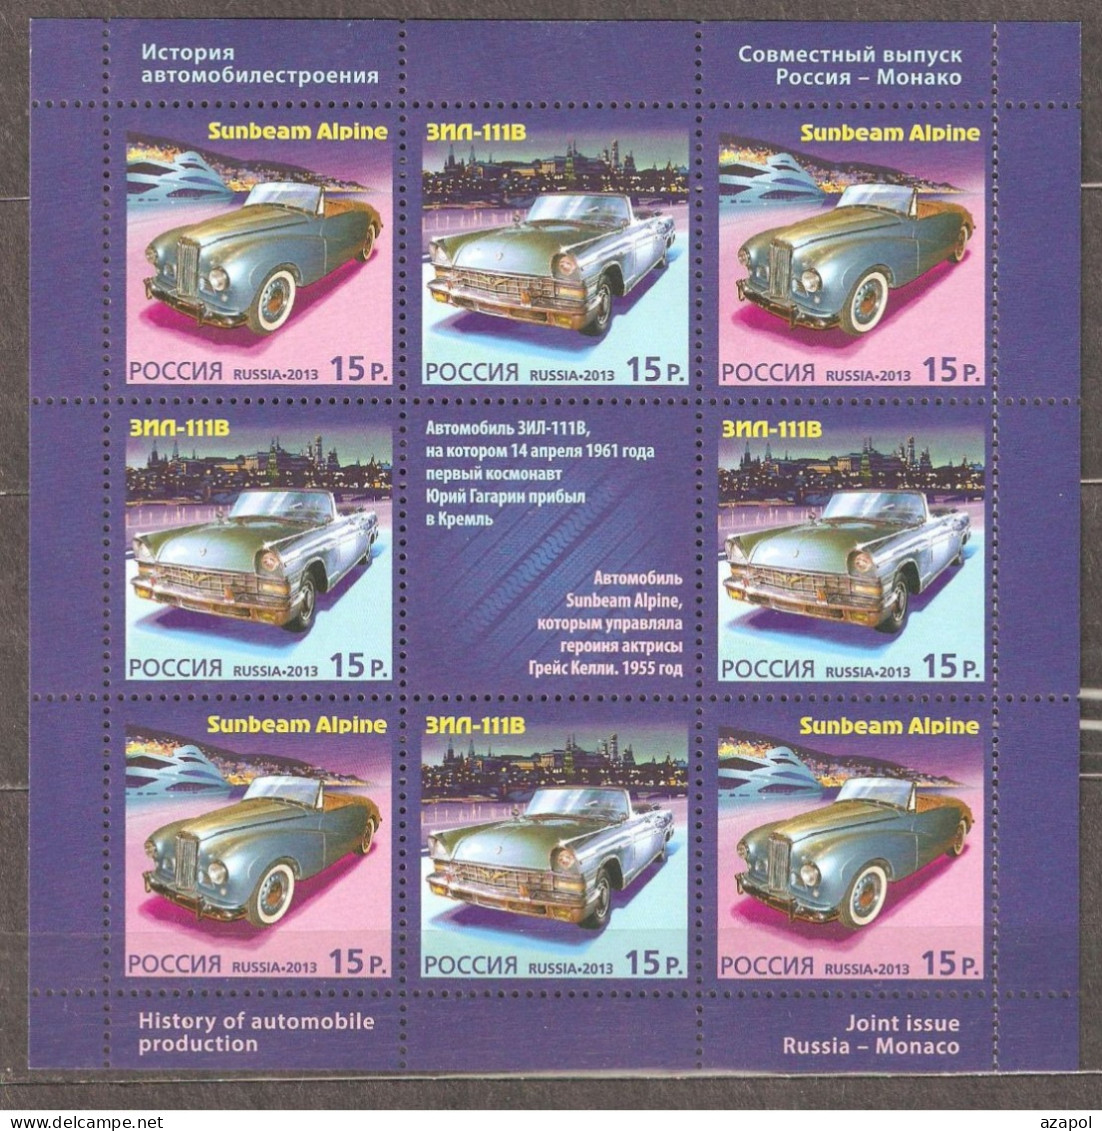 Russia: Mint Sheet, Historical Cars - Join Issue With Monaco, 2013, Mi#2000-1, MNH - Emissioni Congiunte